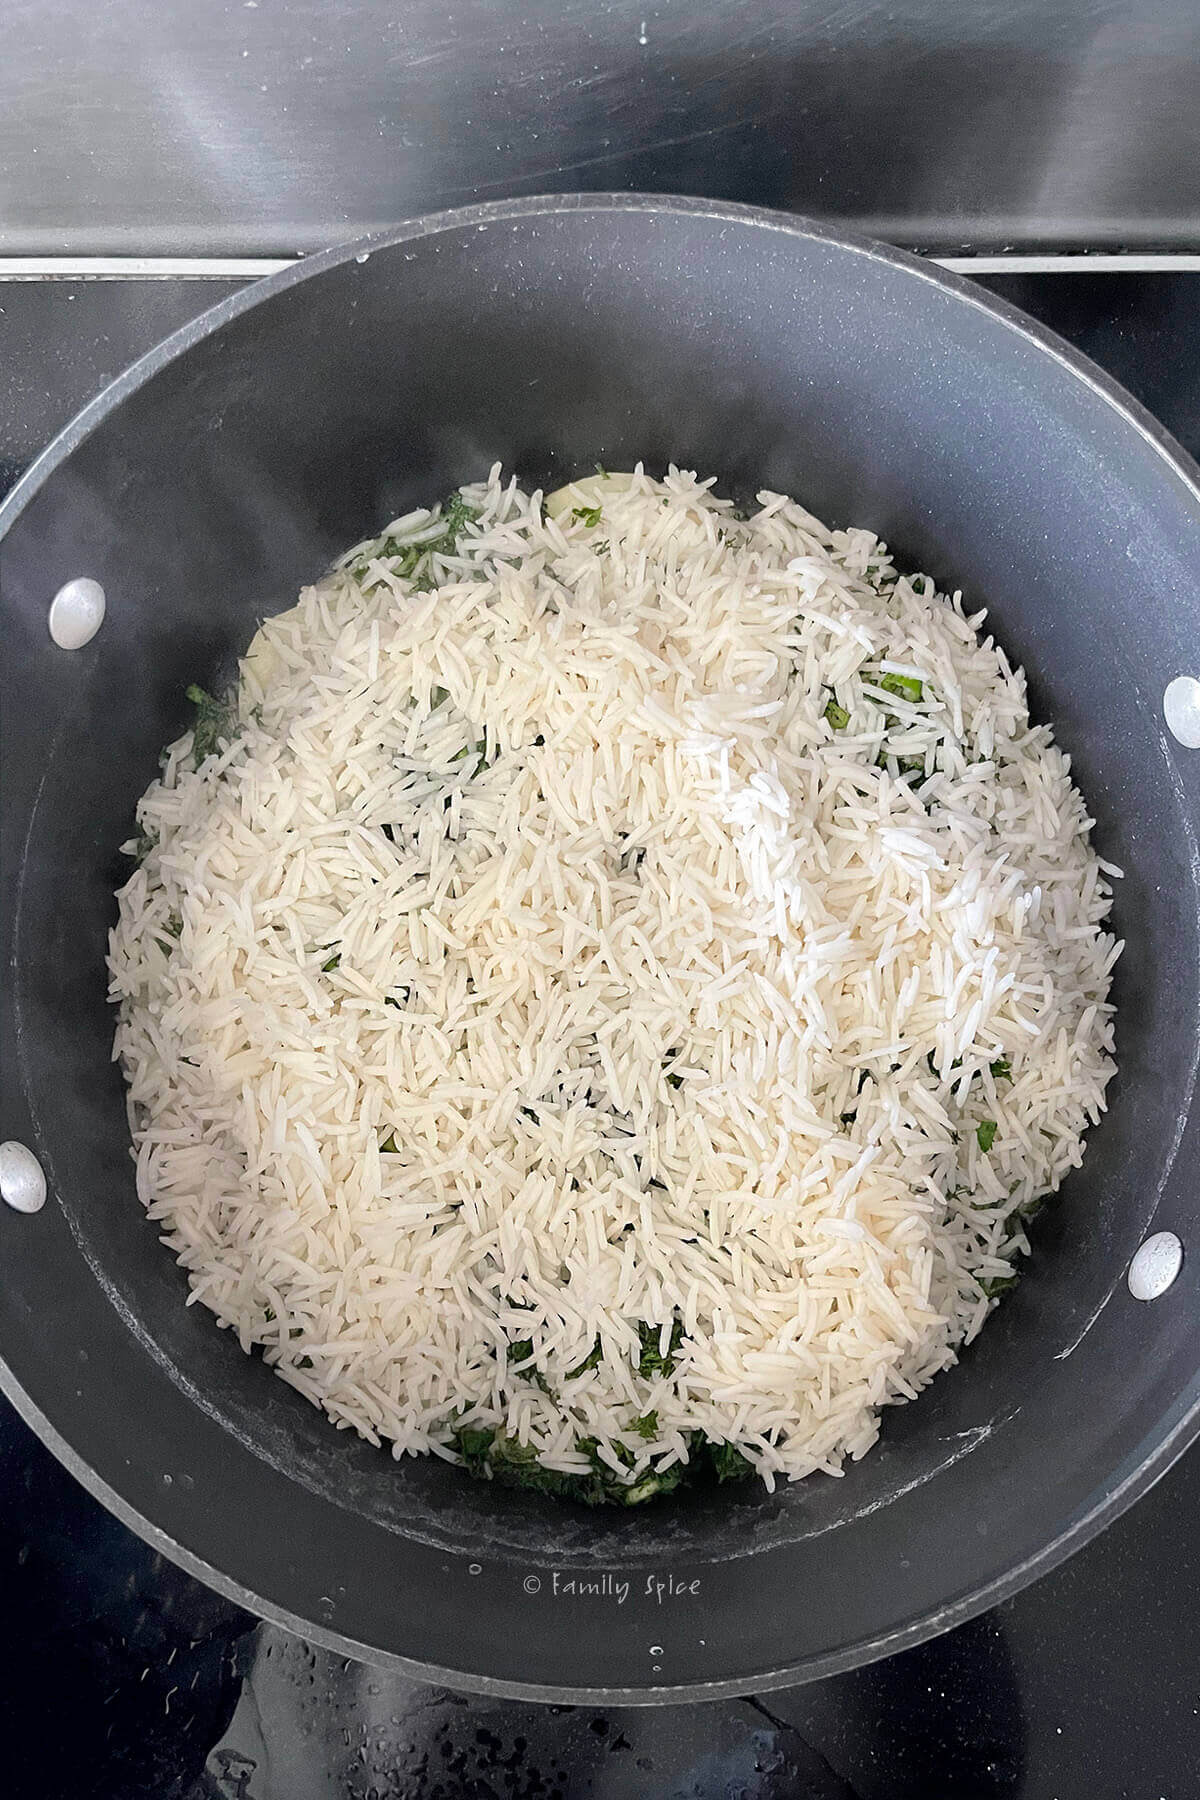 Top view of a non-stick pot with another layer of parboiled rice